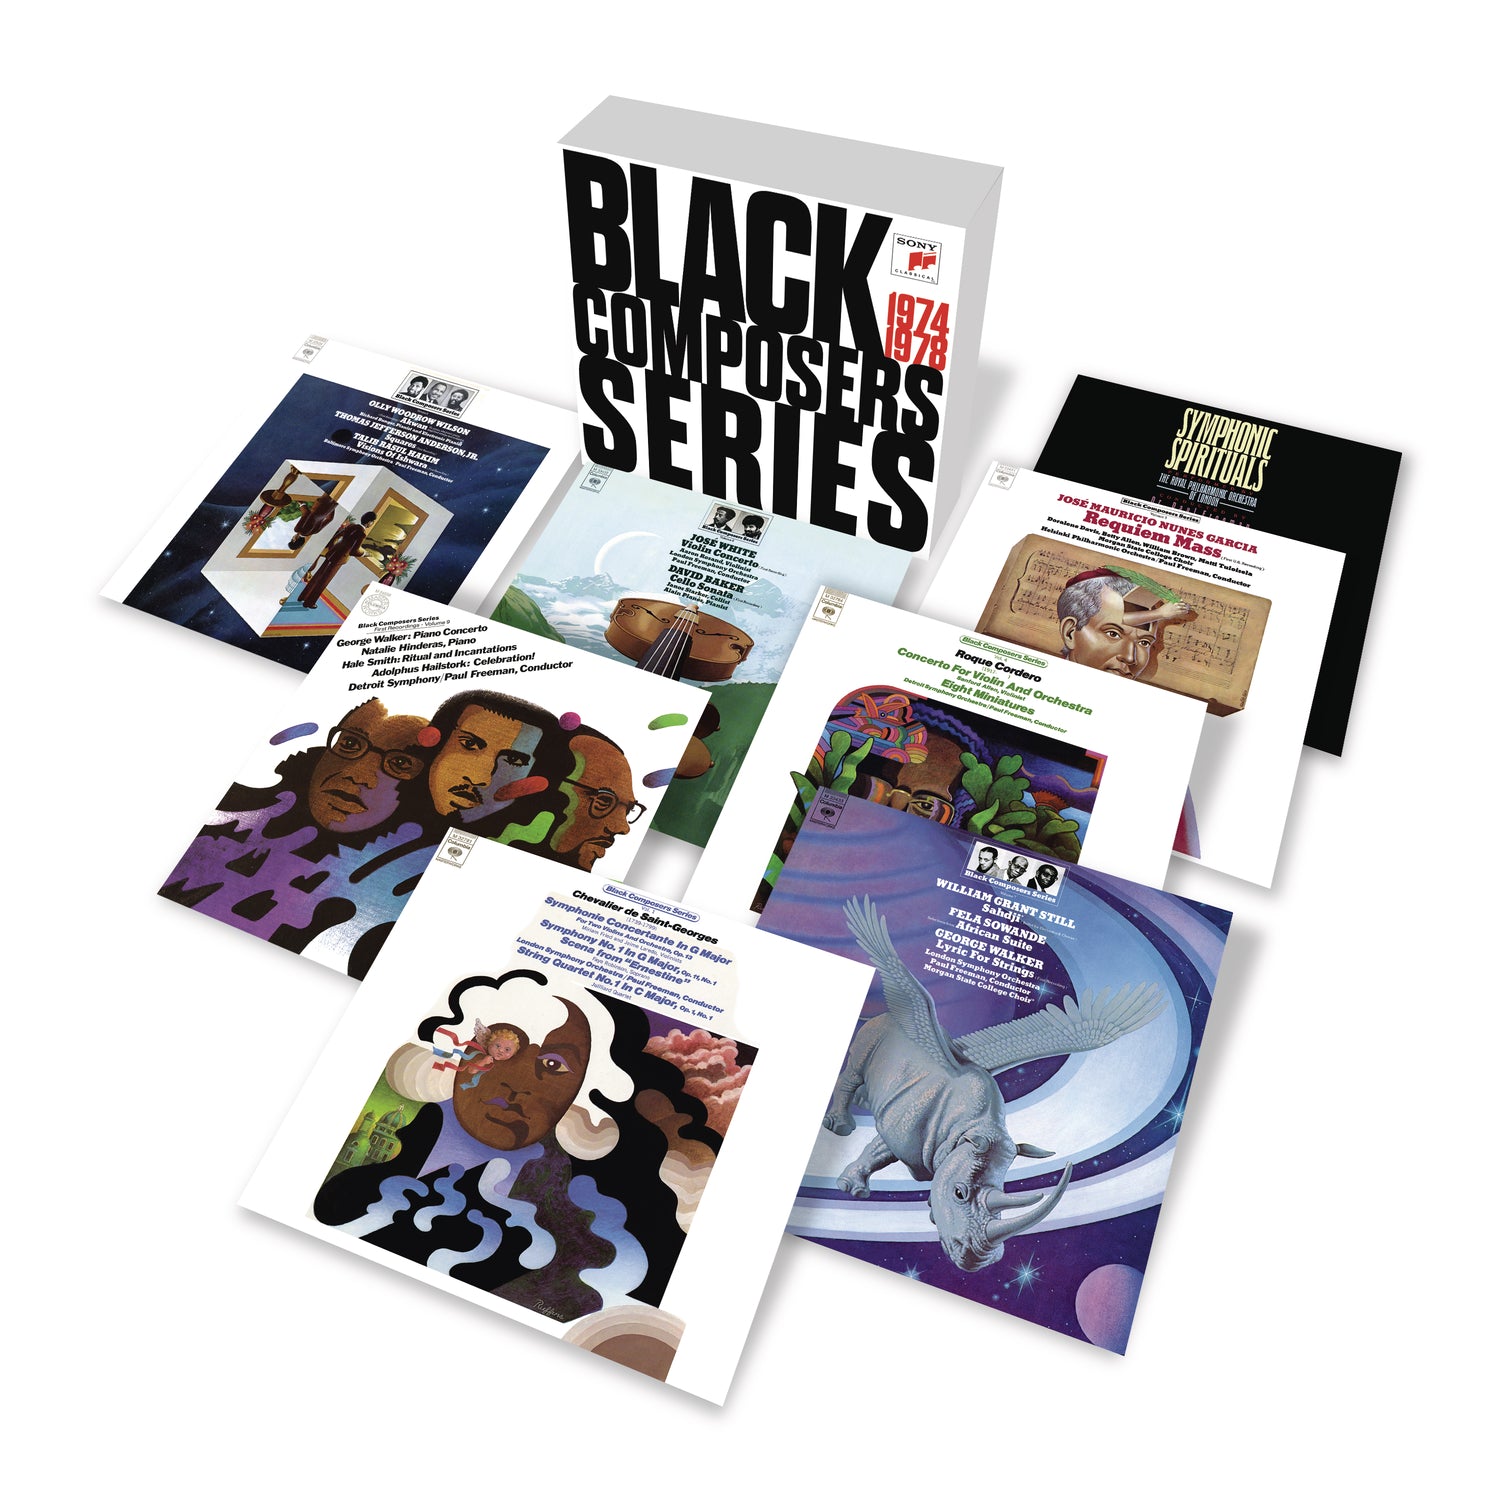 Black Composers Series: The Complete CBS Masterworks Collection